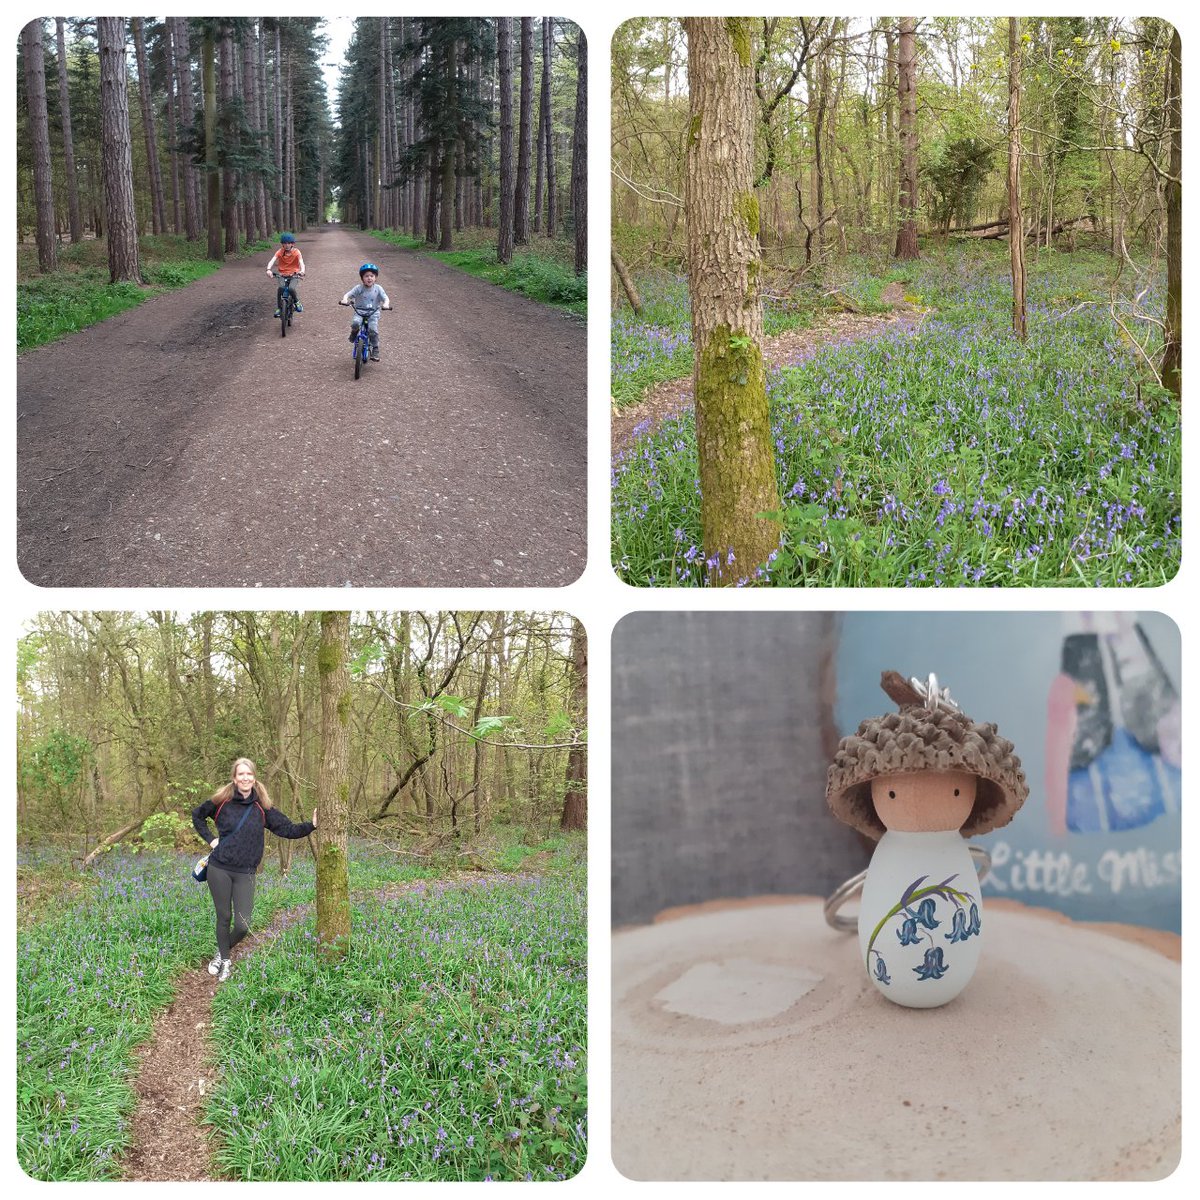 Happy May Day! We spent the day in the woods - boys on bikes, Myself looking for bluebells of course! 💙 
Have you been bluebell spotting? #Bluebells #bluebellseason #MayDay2023 #bikeride #mumofboys